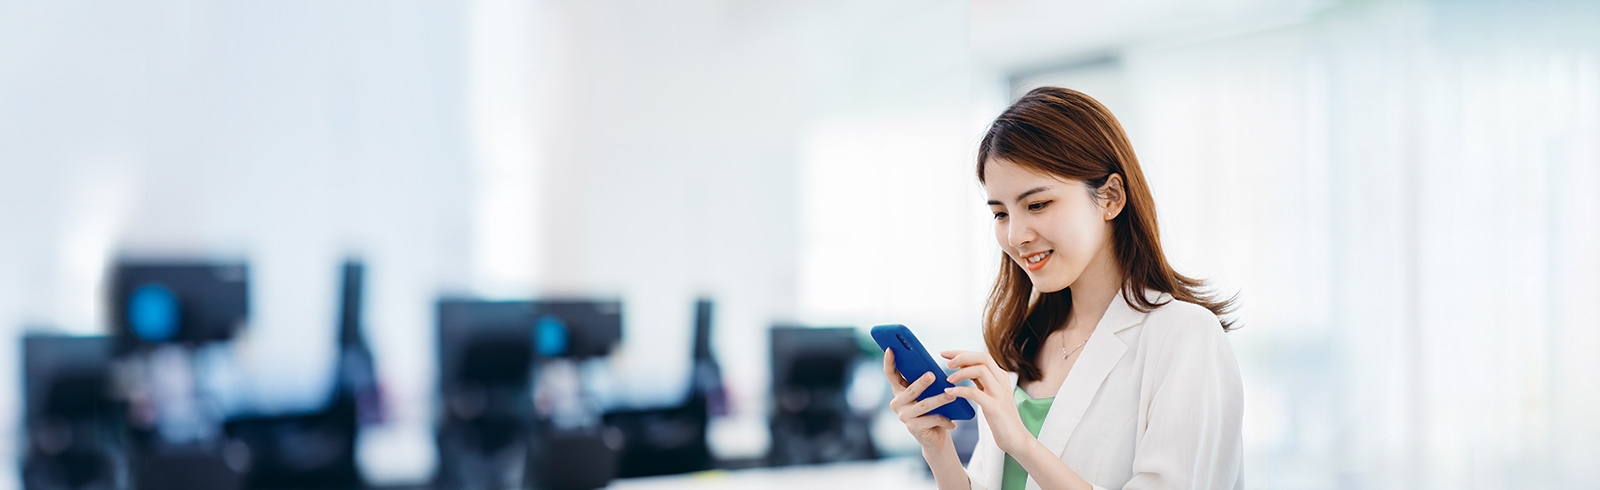 Brown hair woman using mobile phone in office